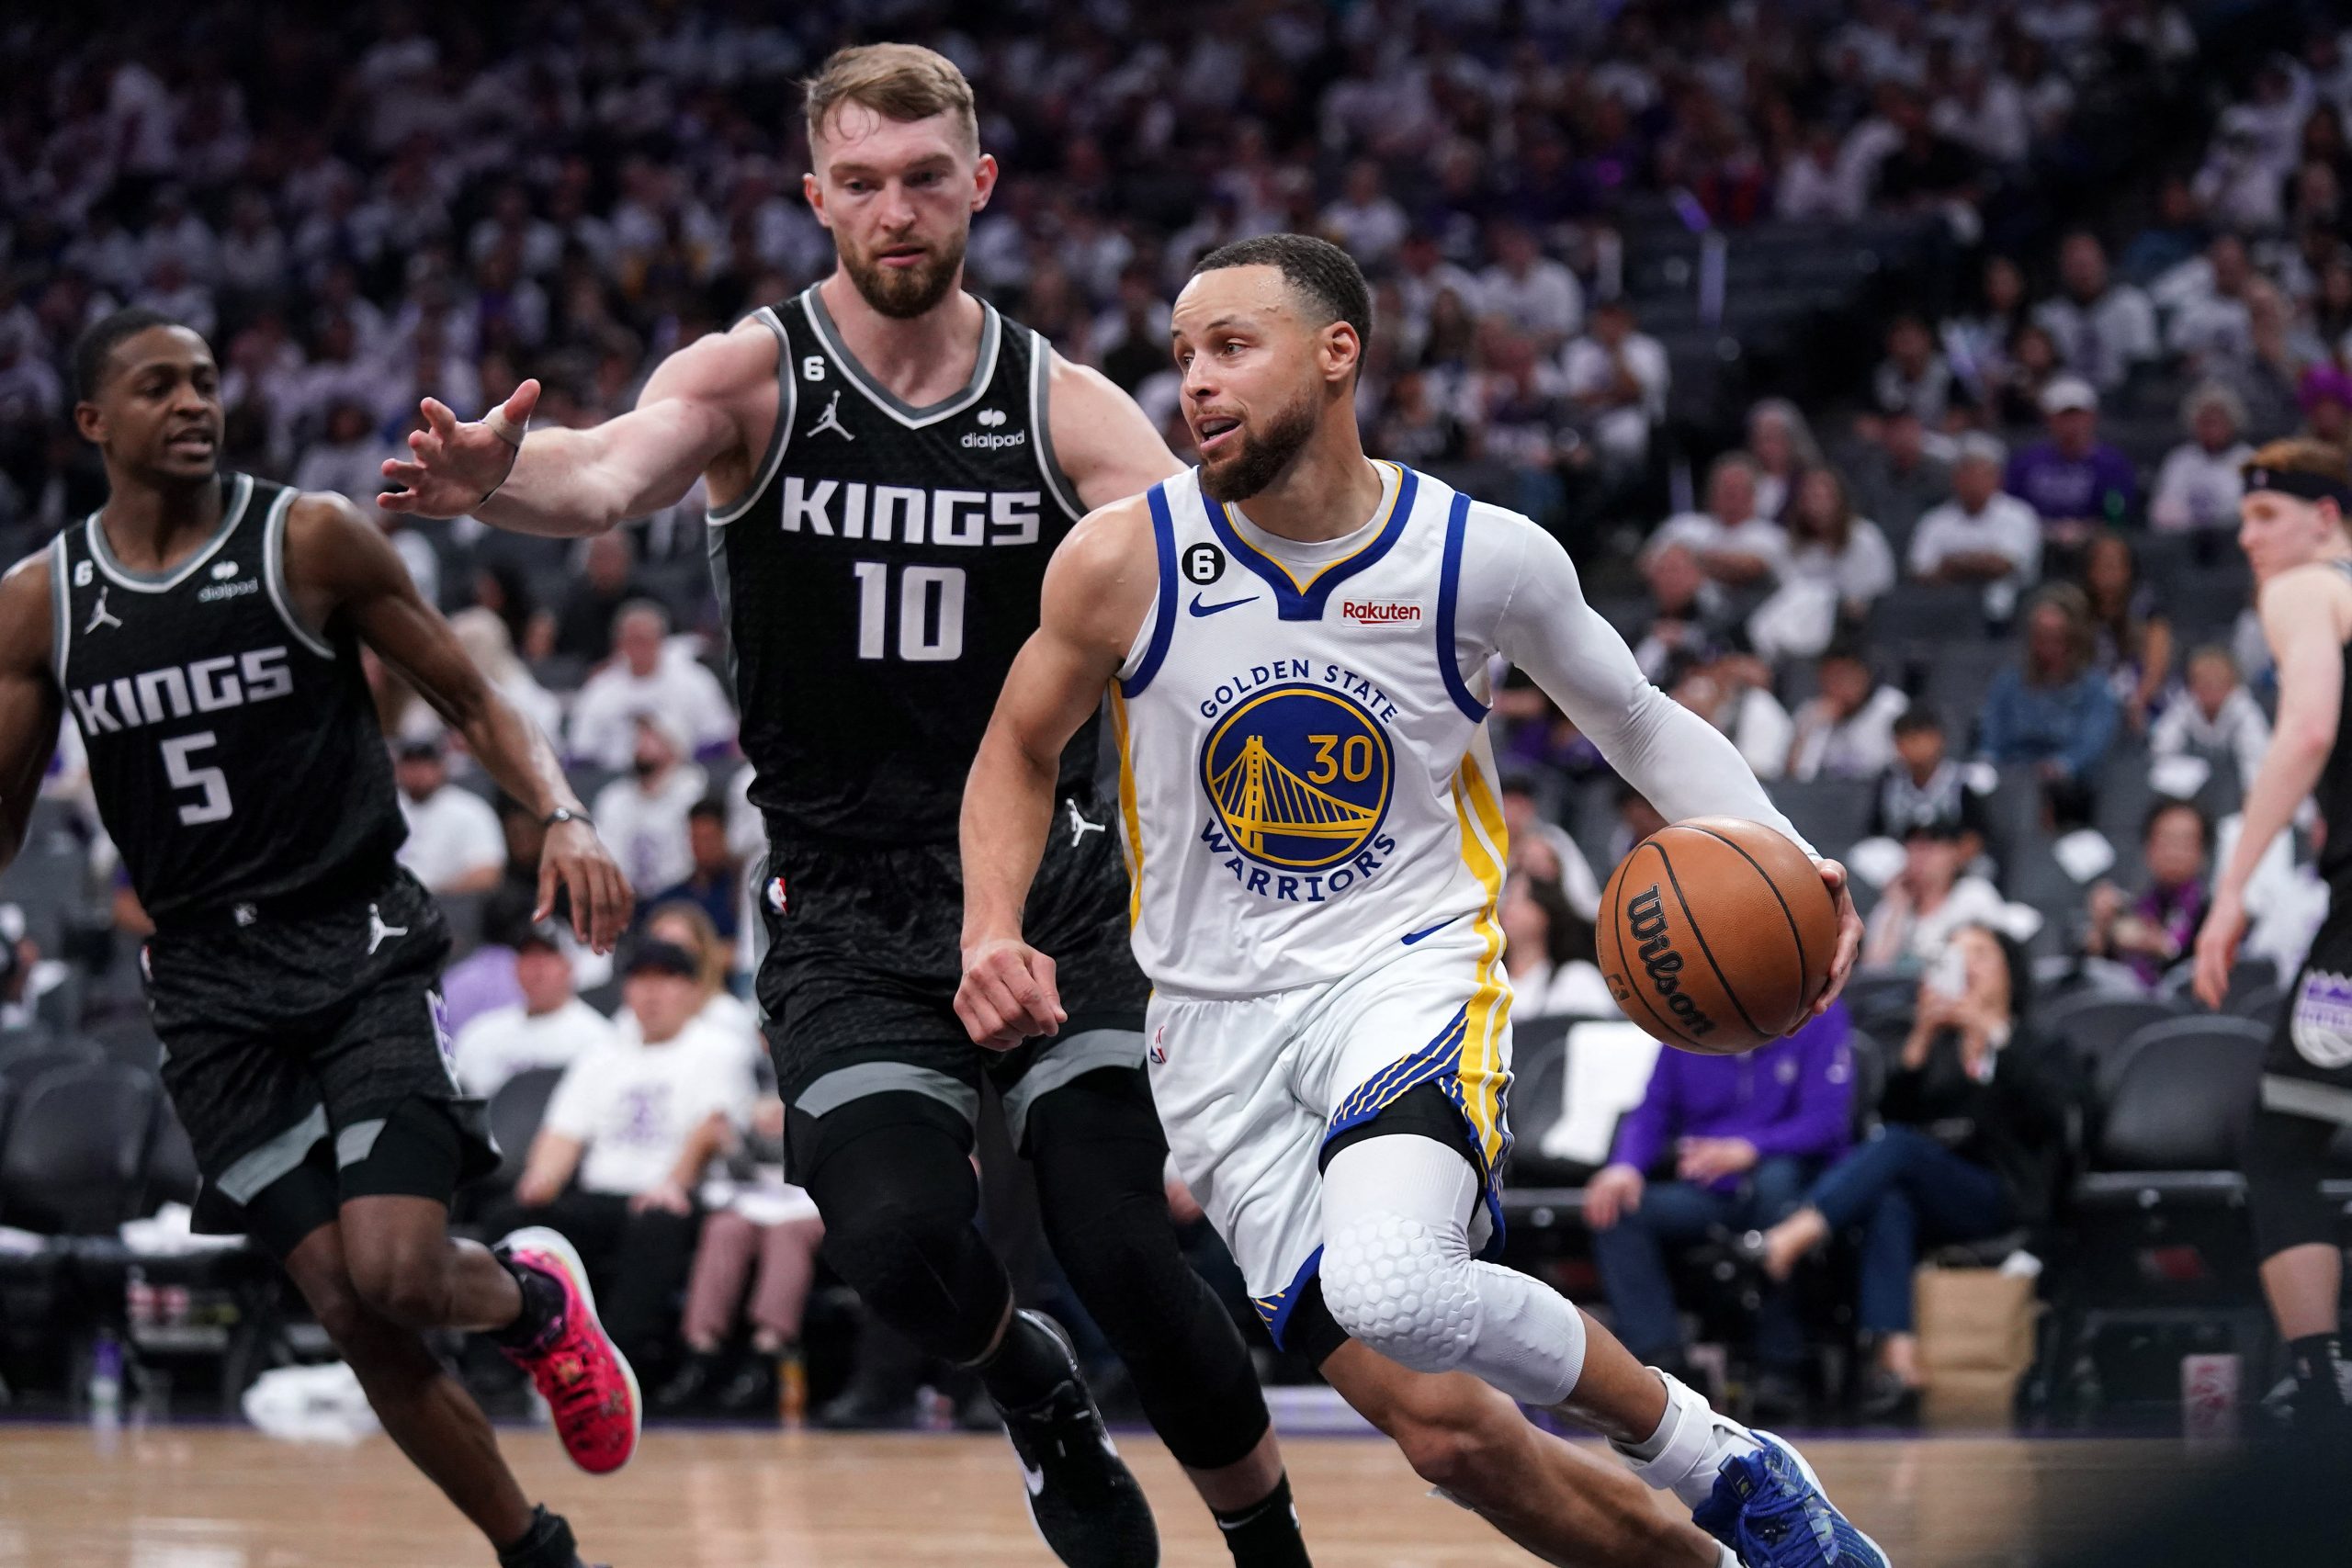 Apr 15, 2023; Sacramento, California, USA; Golden State Warriors guard Stephen Curry (30) dribbles past Sacramento Kings forward Domantas Sabonis (10) in the third quarter during game one of the 2023 NBA playoffs at the Golden 1 Center. Mandatory Credit: Cary Edmondson-USA TODAY Sports Photo: Cary Edmondson/REUTERS